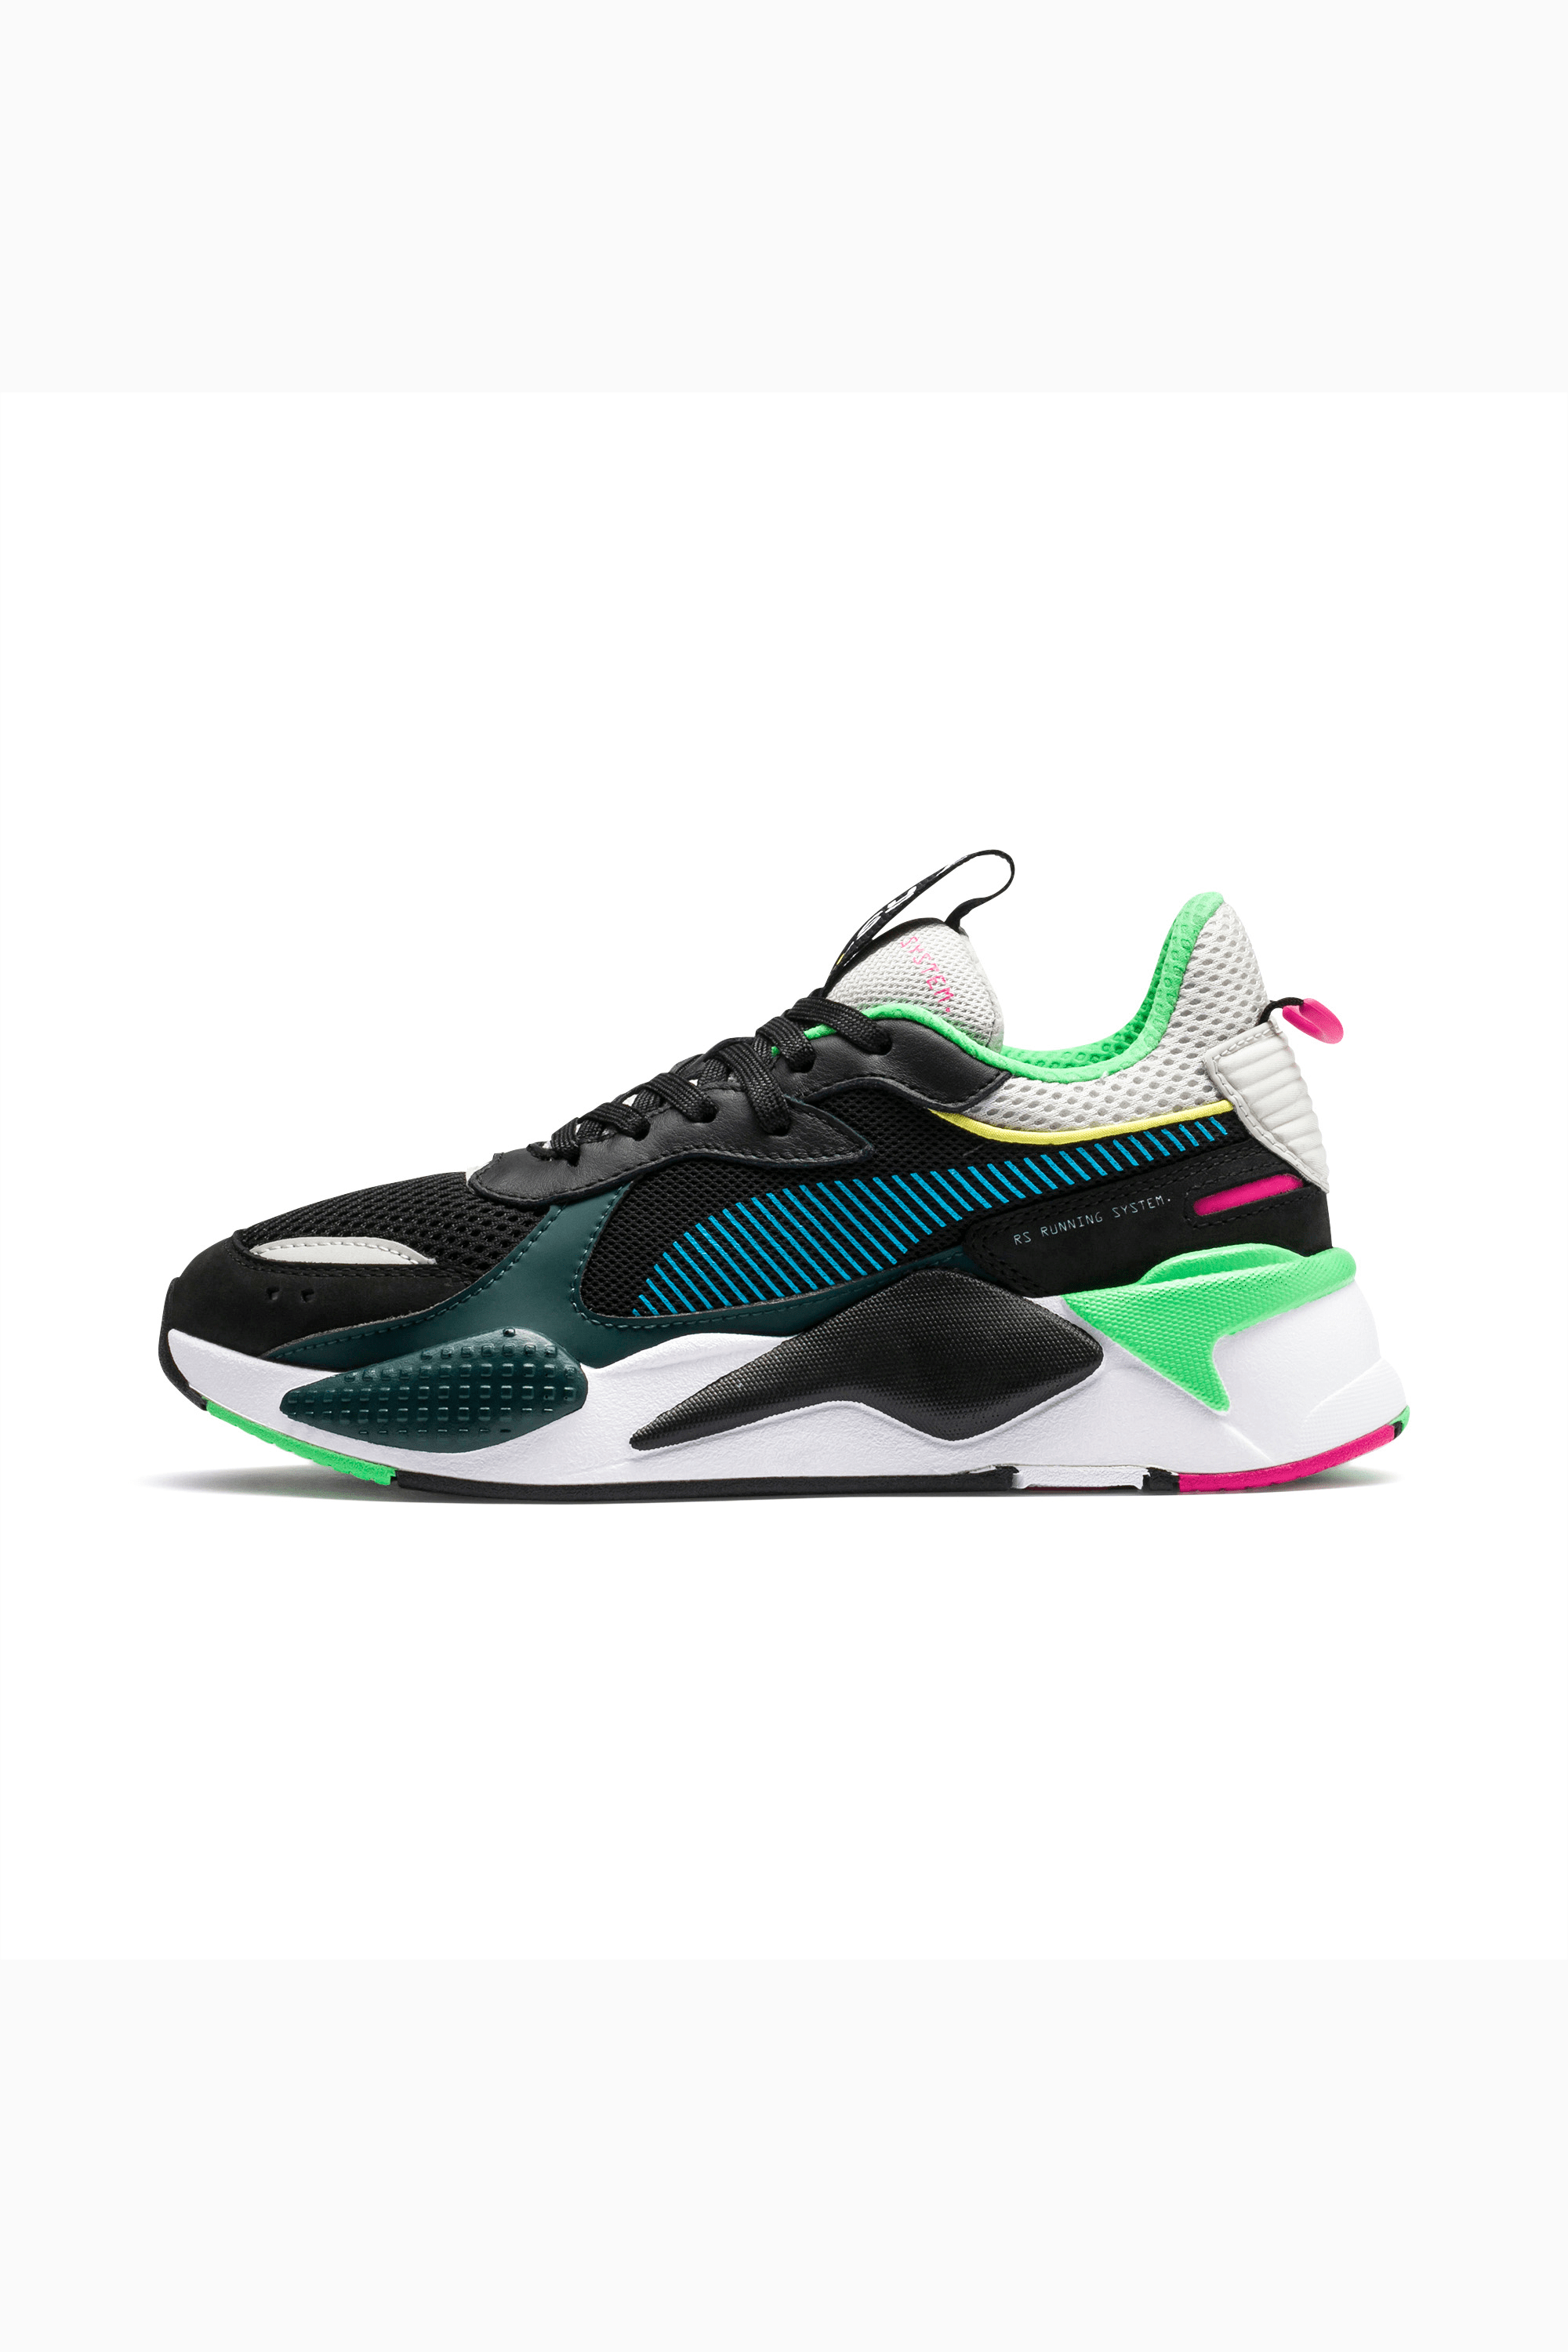 Puma RS-X Toys Sneakers 23cm